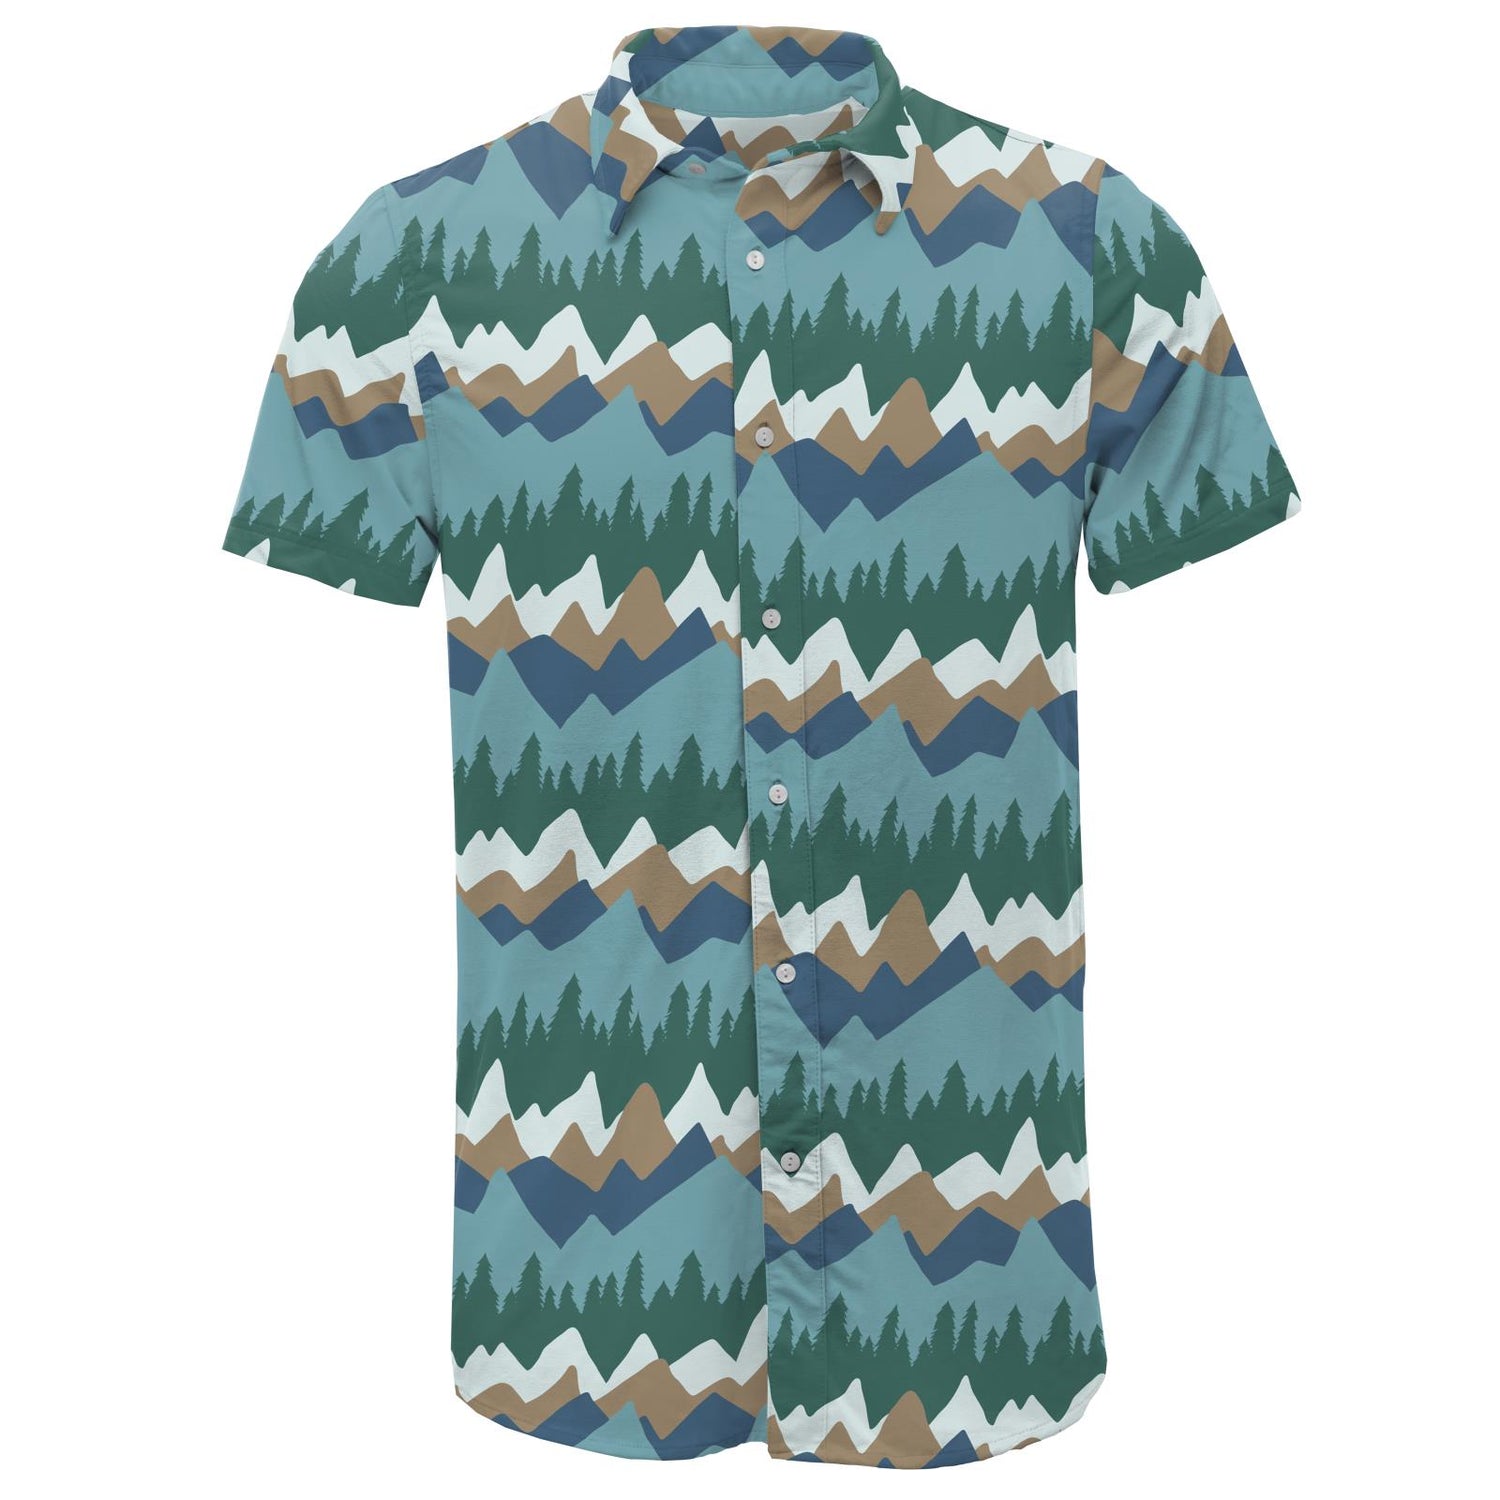 Men's Print Short Sleeve Luxe Jersey Button Down Shirt in Glacier Mountains